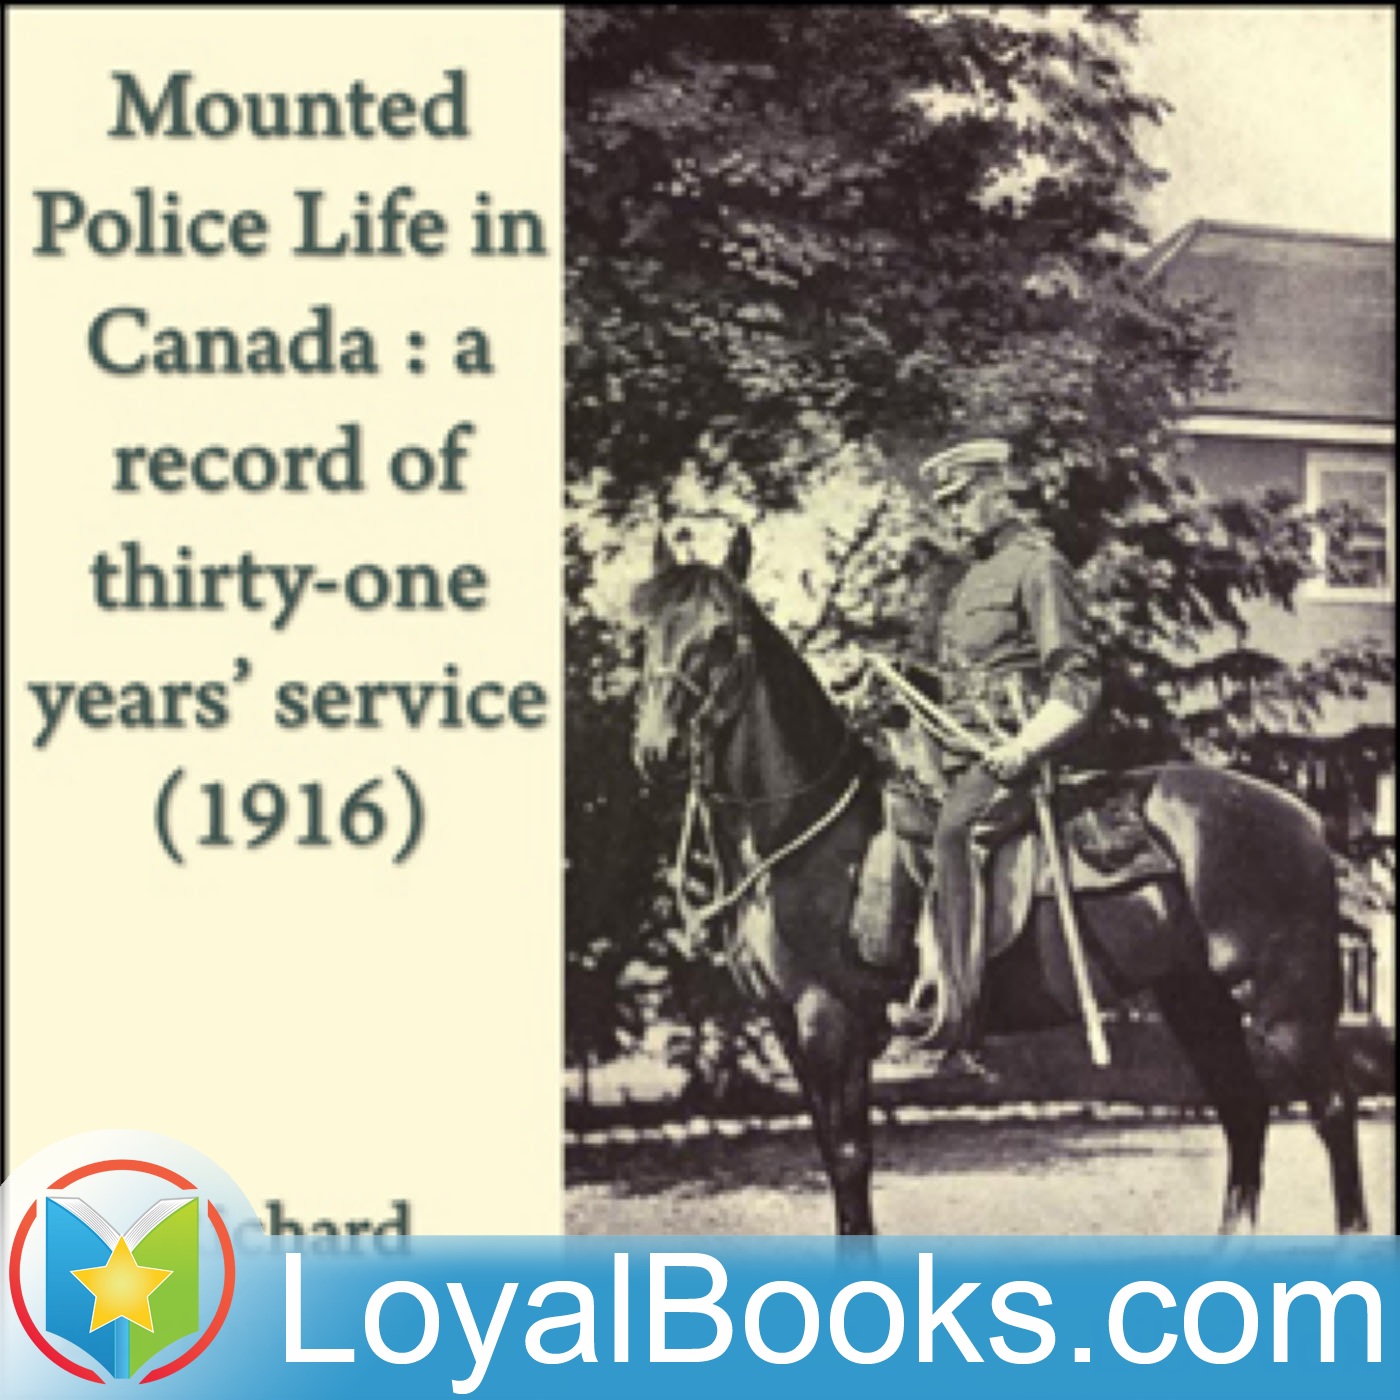 Mounted Police Life in Canada : a record of thirty-one years' service (1916) by Richard Burton Deane